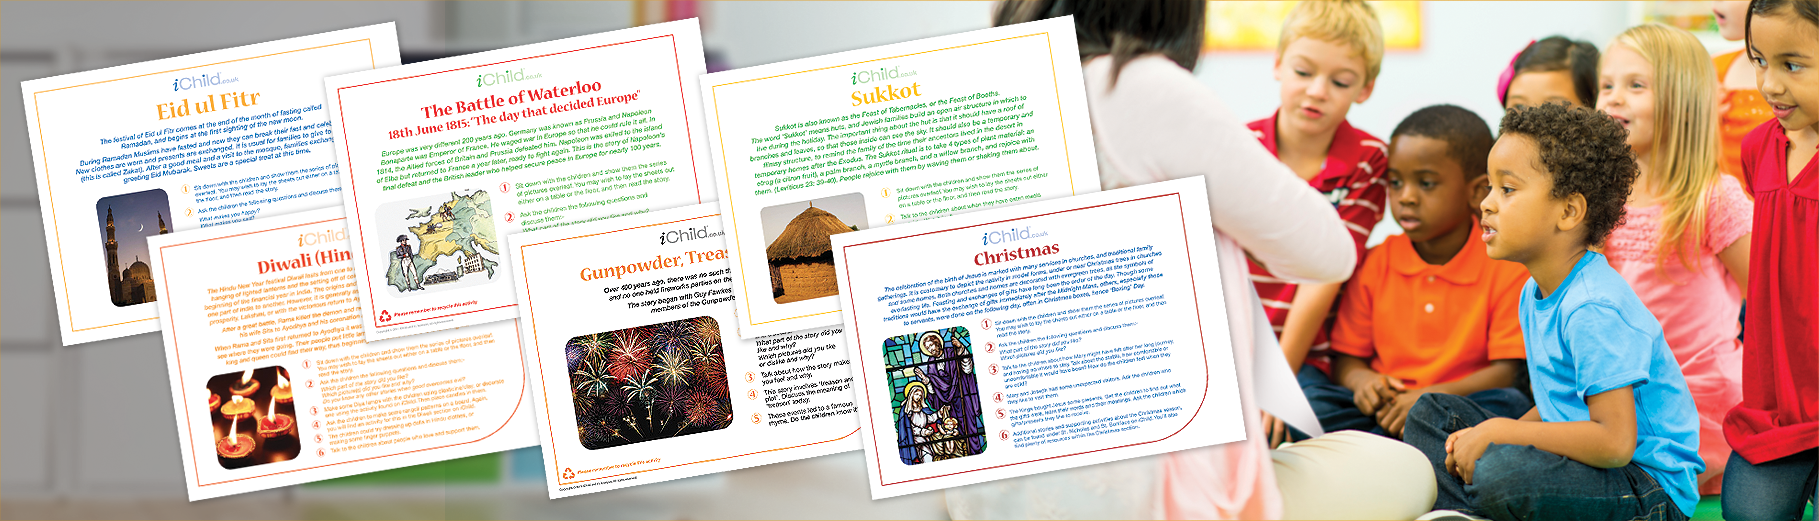 Examples of Historical and Religious Festival Resources